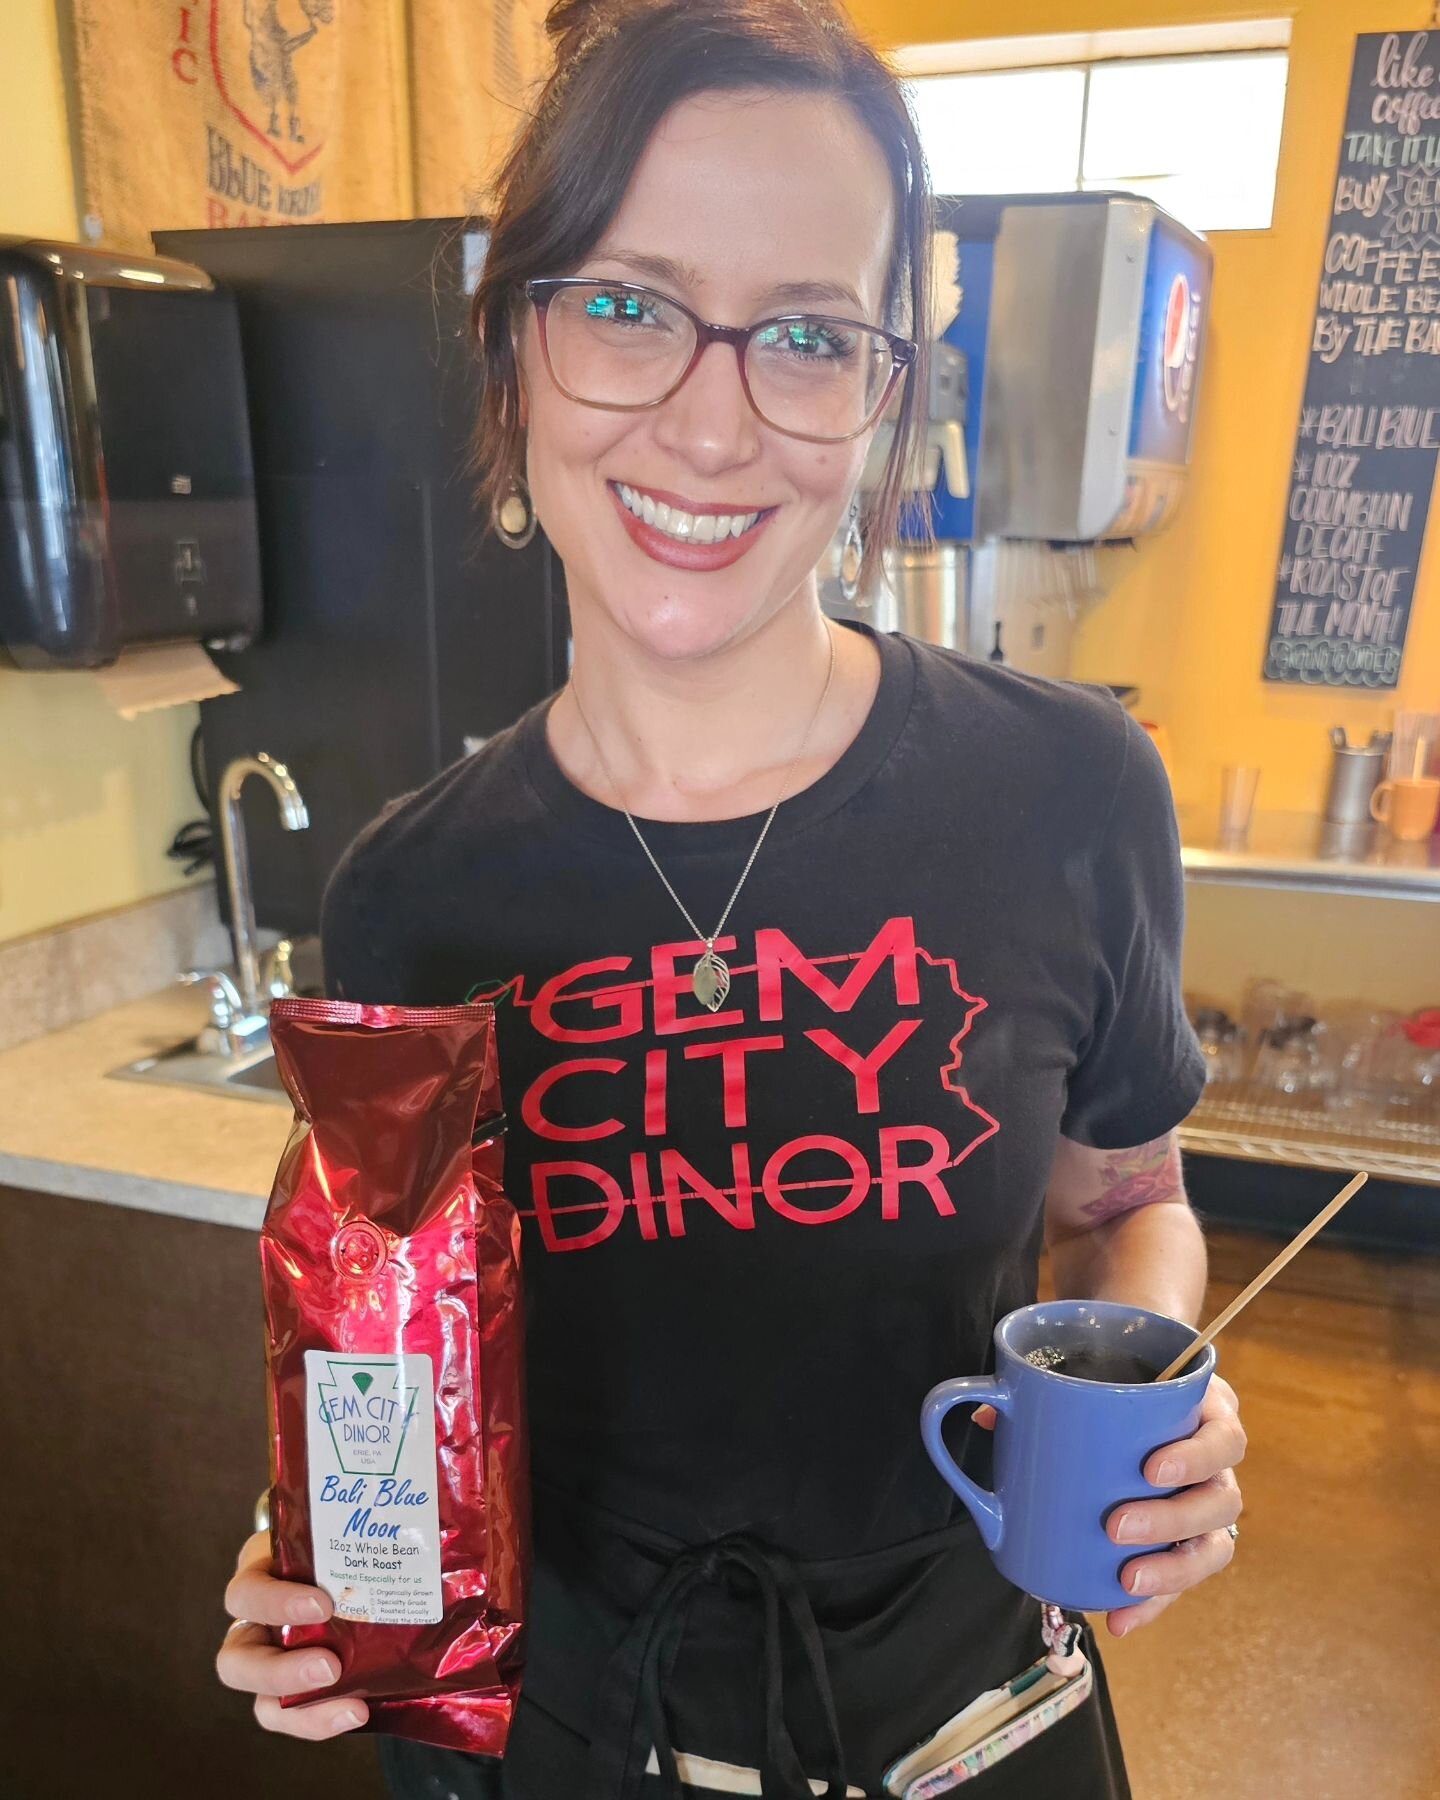 Wishing our best neighbors @gemcitydinor a happy 5 year anniversary! Our coffee friendship has been flourishing over our local favorite Bali Blue Moon 🌚